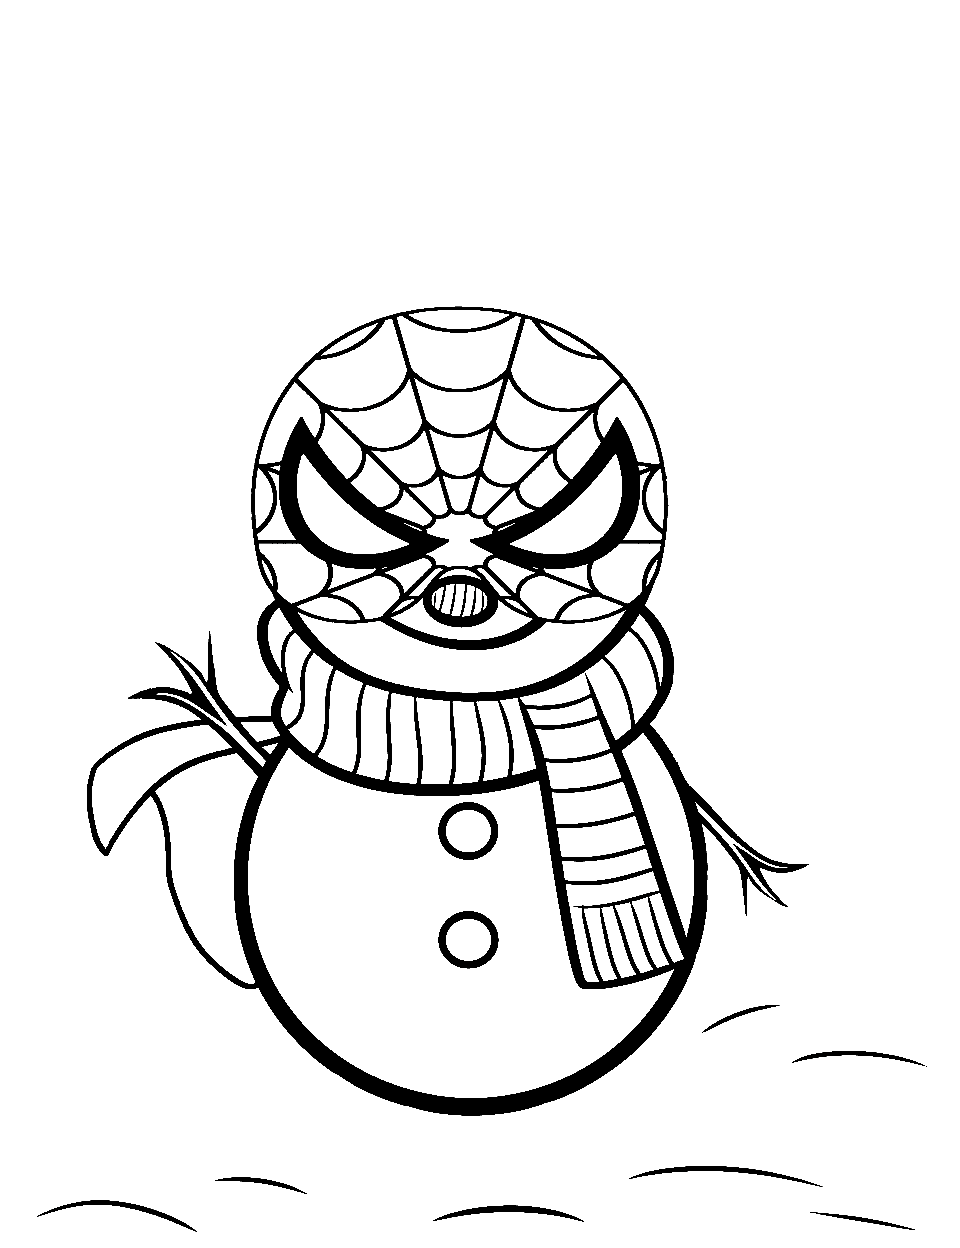 Snowman Superhero in Action Coloring Page - A snowman dressed as a superhero, striking a heroic pose.